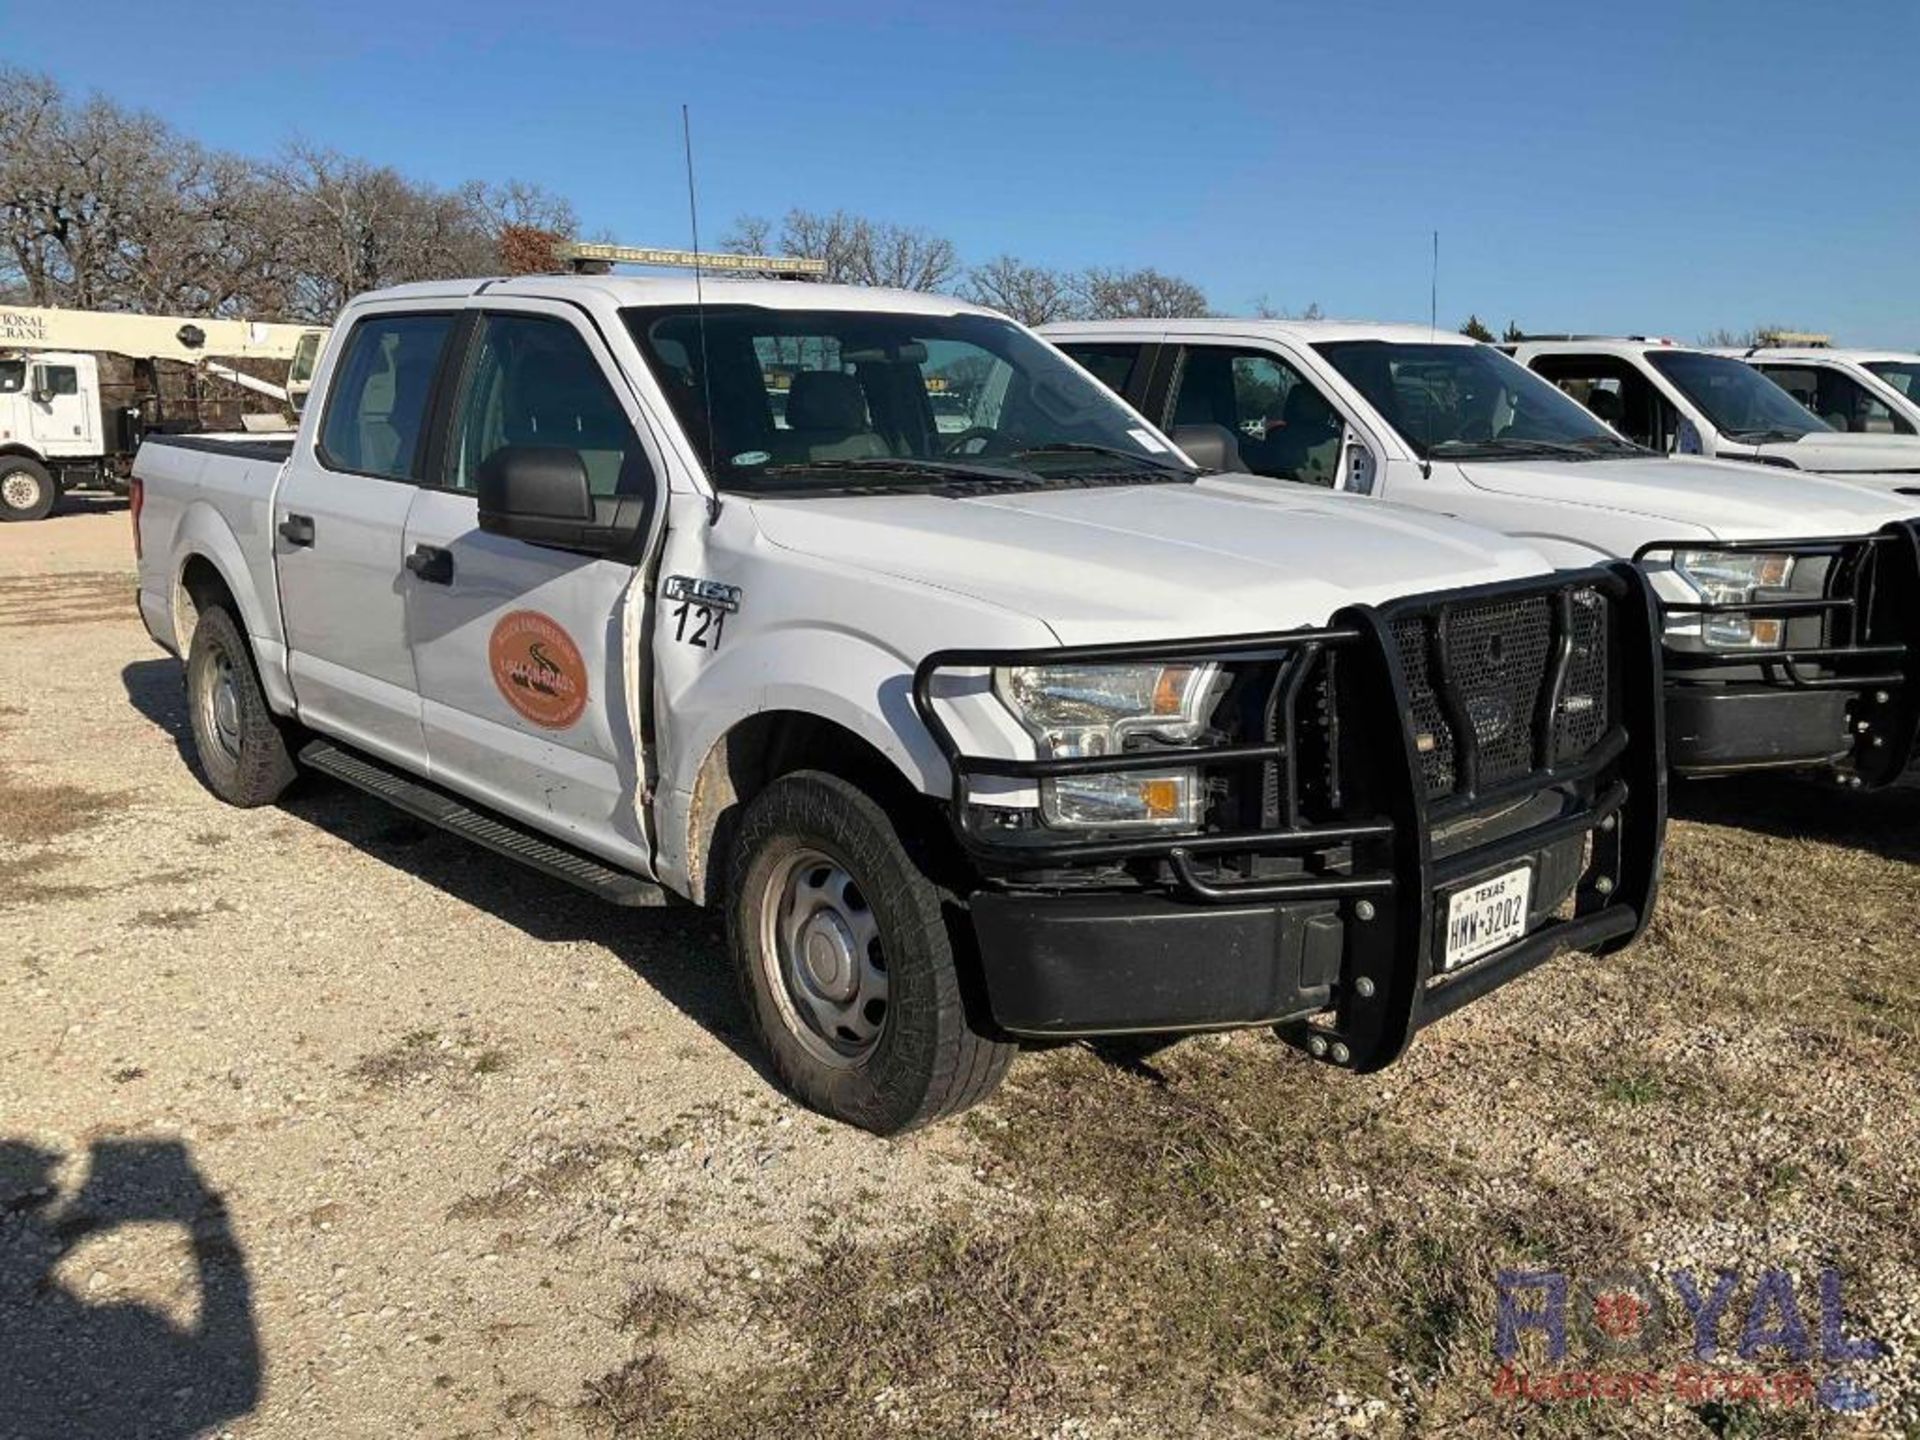 Ford F150 Crew Cab Pickup Truck - Image 2 of 18